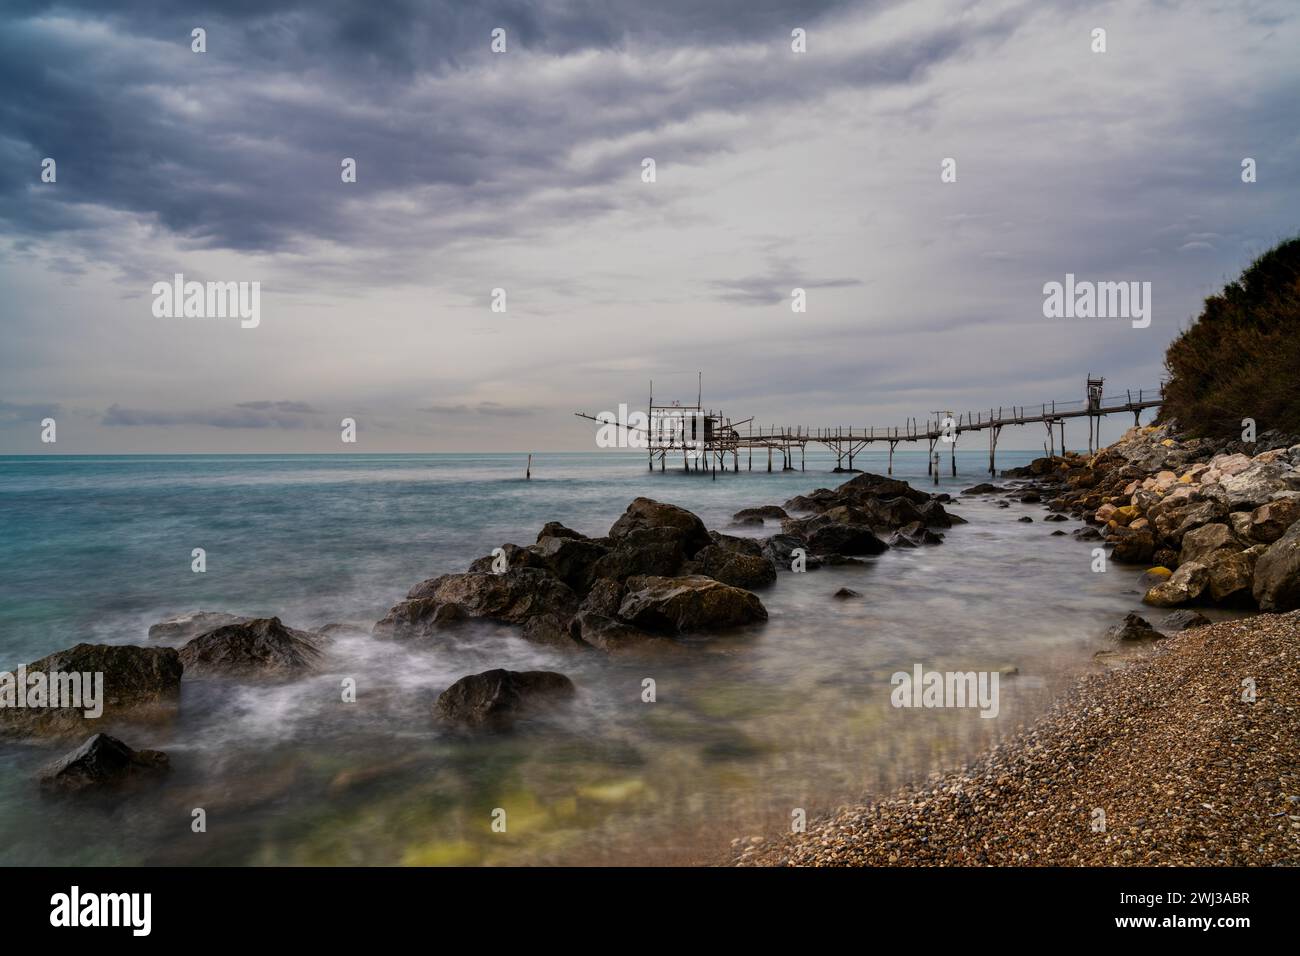 View of the Trabocco Turchino fishing machine and hut on the Abruzzo coast in Italy Stock Photo